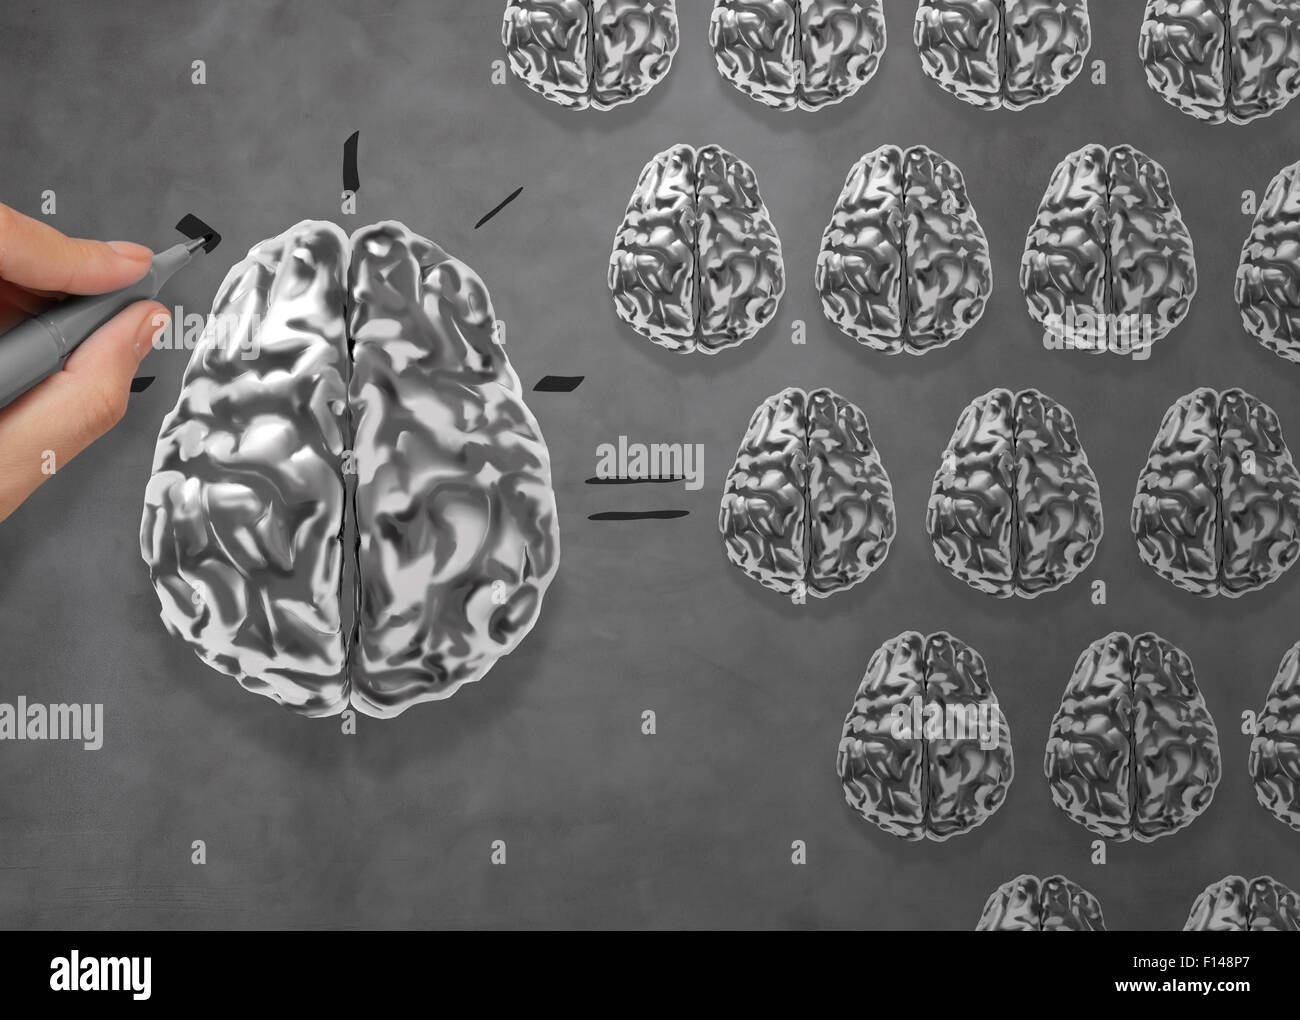 hand draws 3d metal brain asTeamwork concept Many small brains equal a big one. Stock Photo